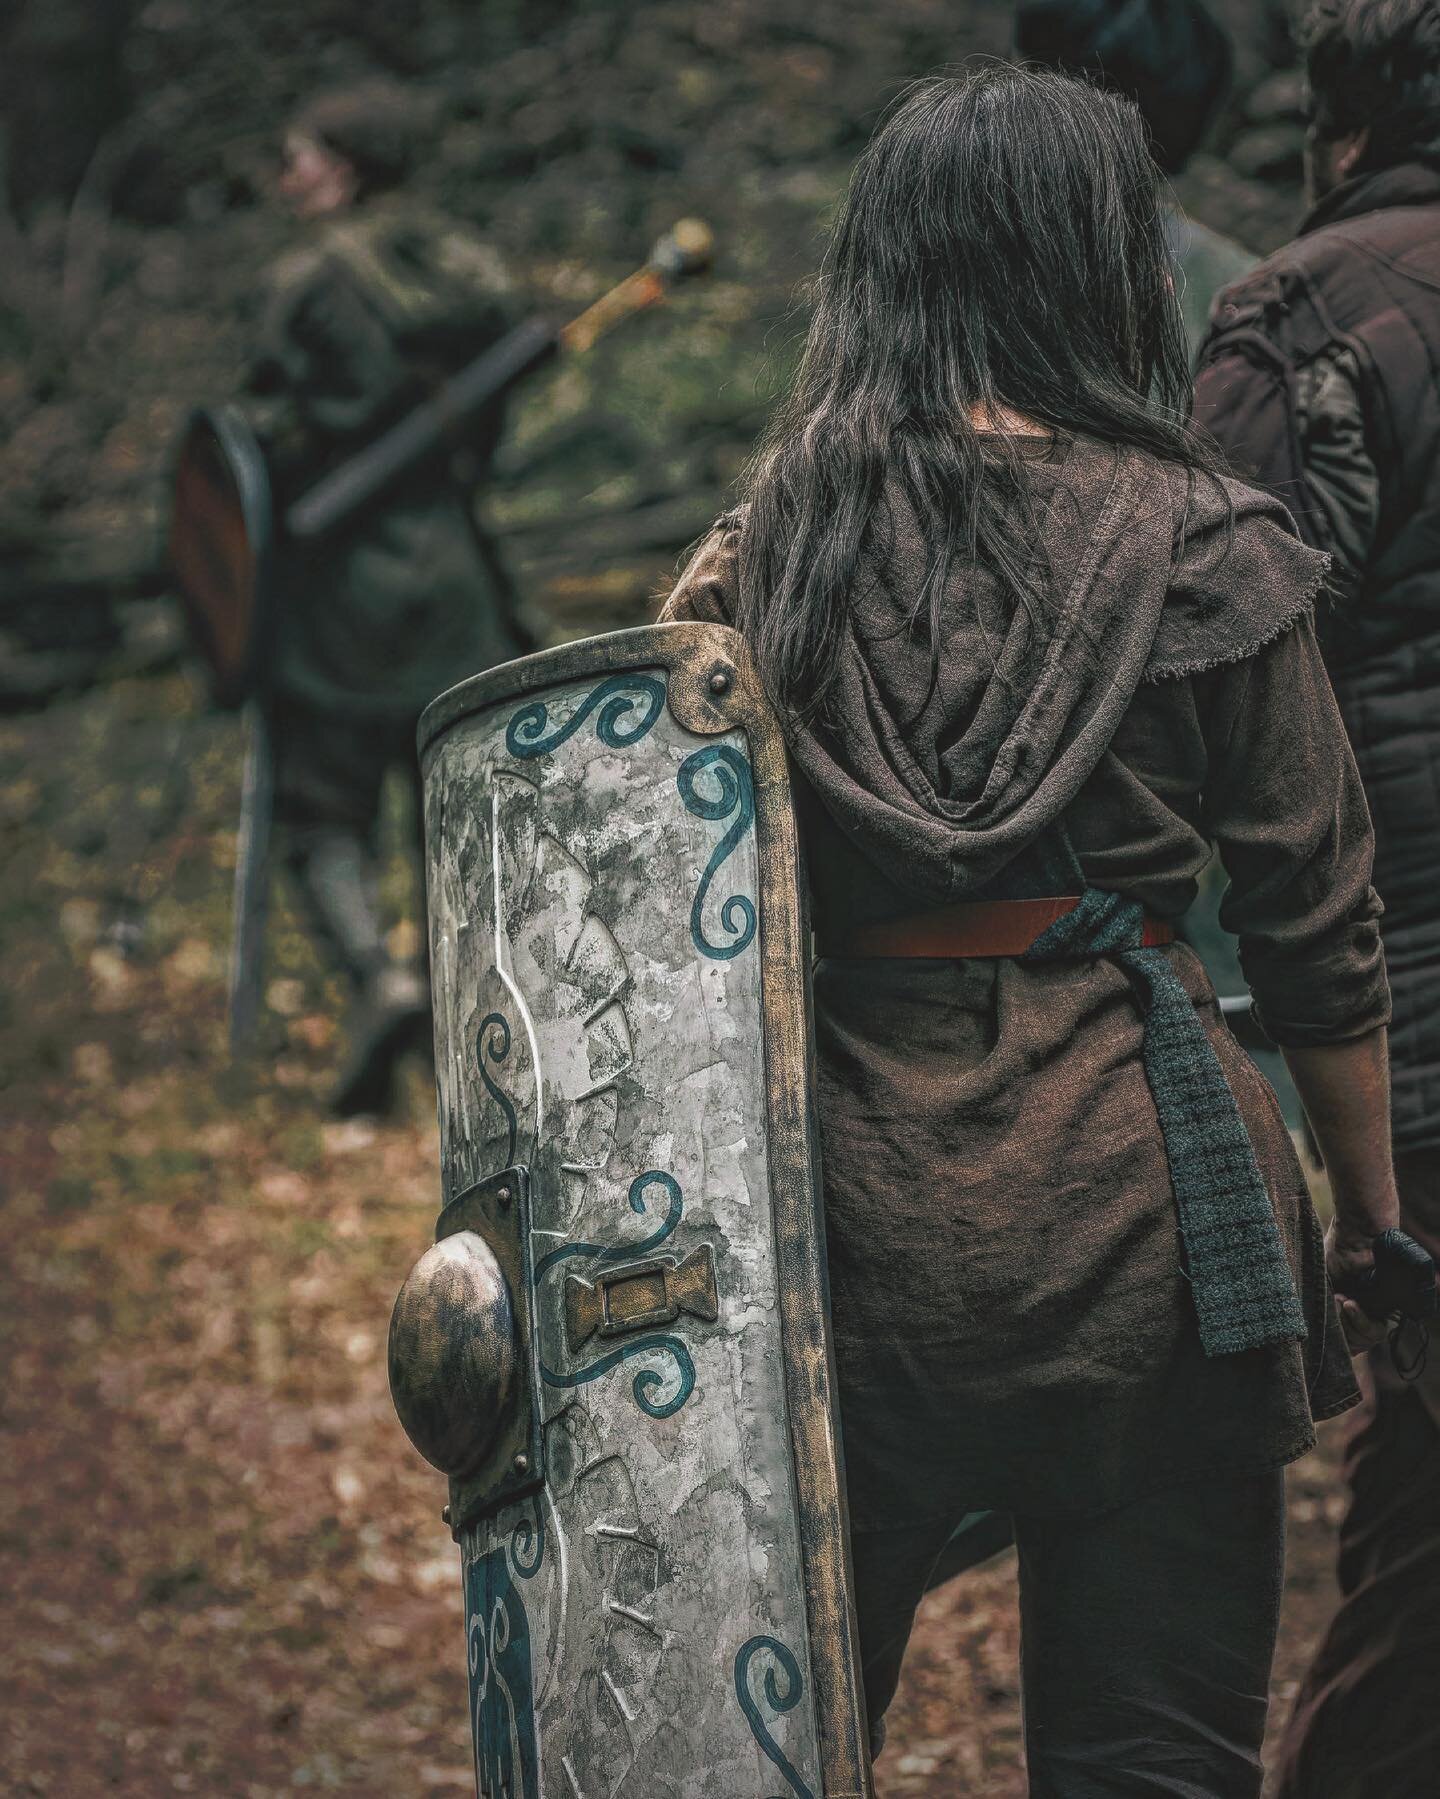 Blood calls to blood across the ages. The arms that served our forefathers still serve us to protect our land. We issue the call to all Wold Folk across Olaran. Return to the Wold to defend your kin! 
&mdash;
#medieval #larp #dnd #germanic #celtic #s